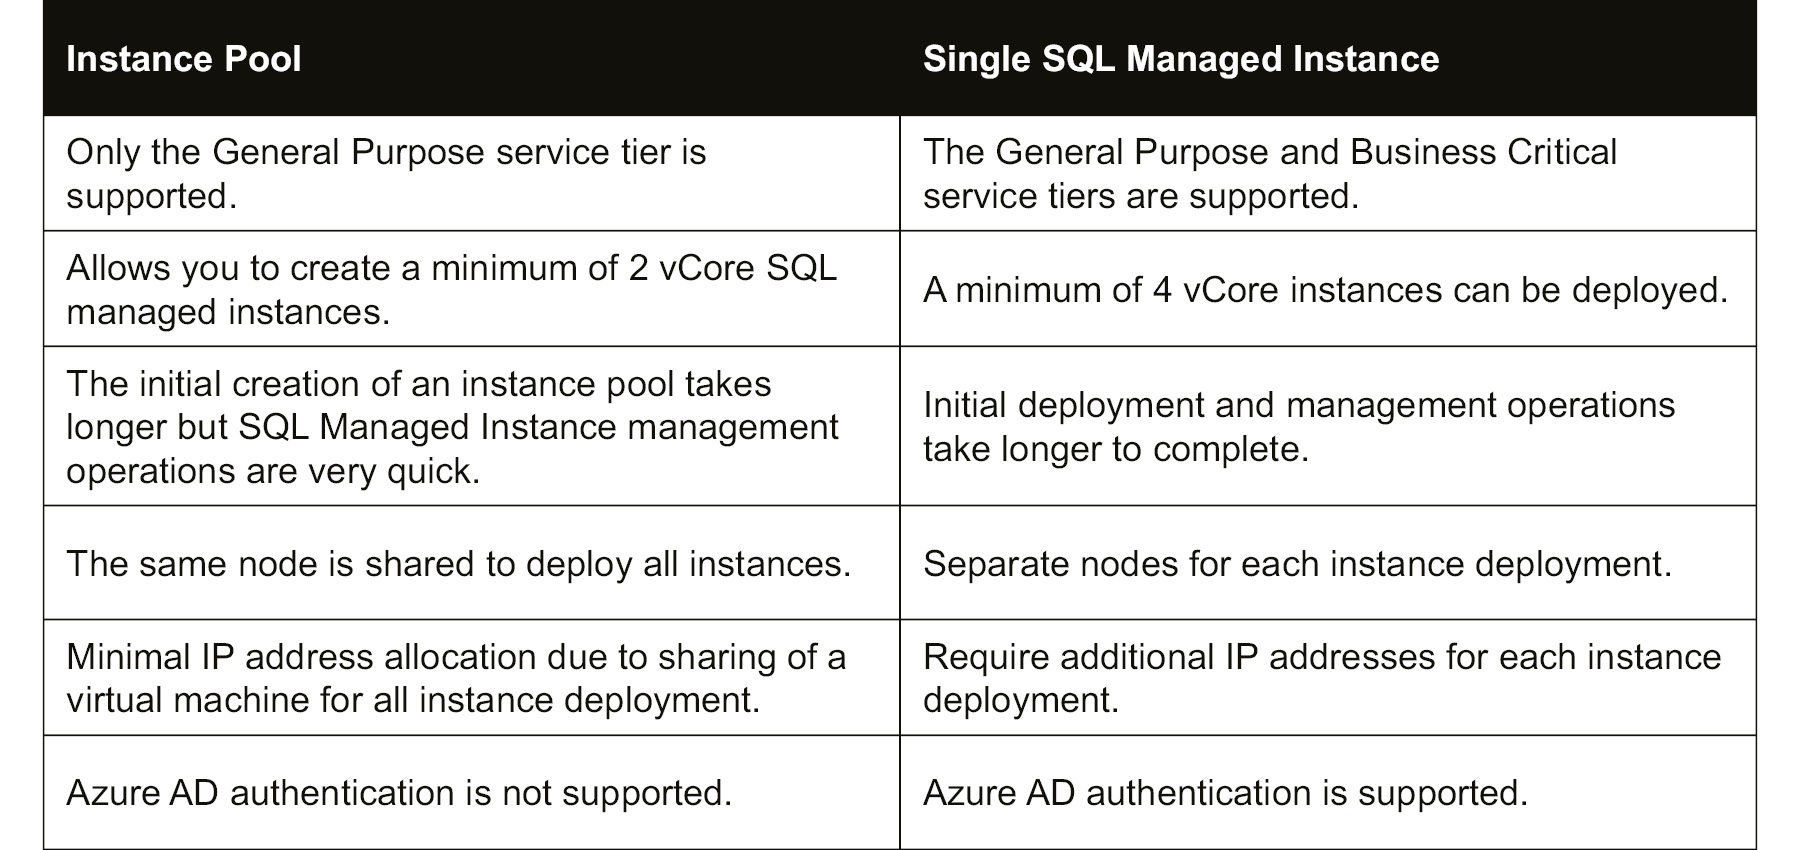 Differences between an instance pool and a single SQL managed instance